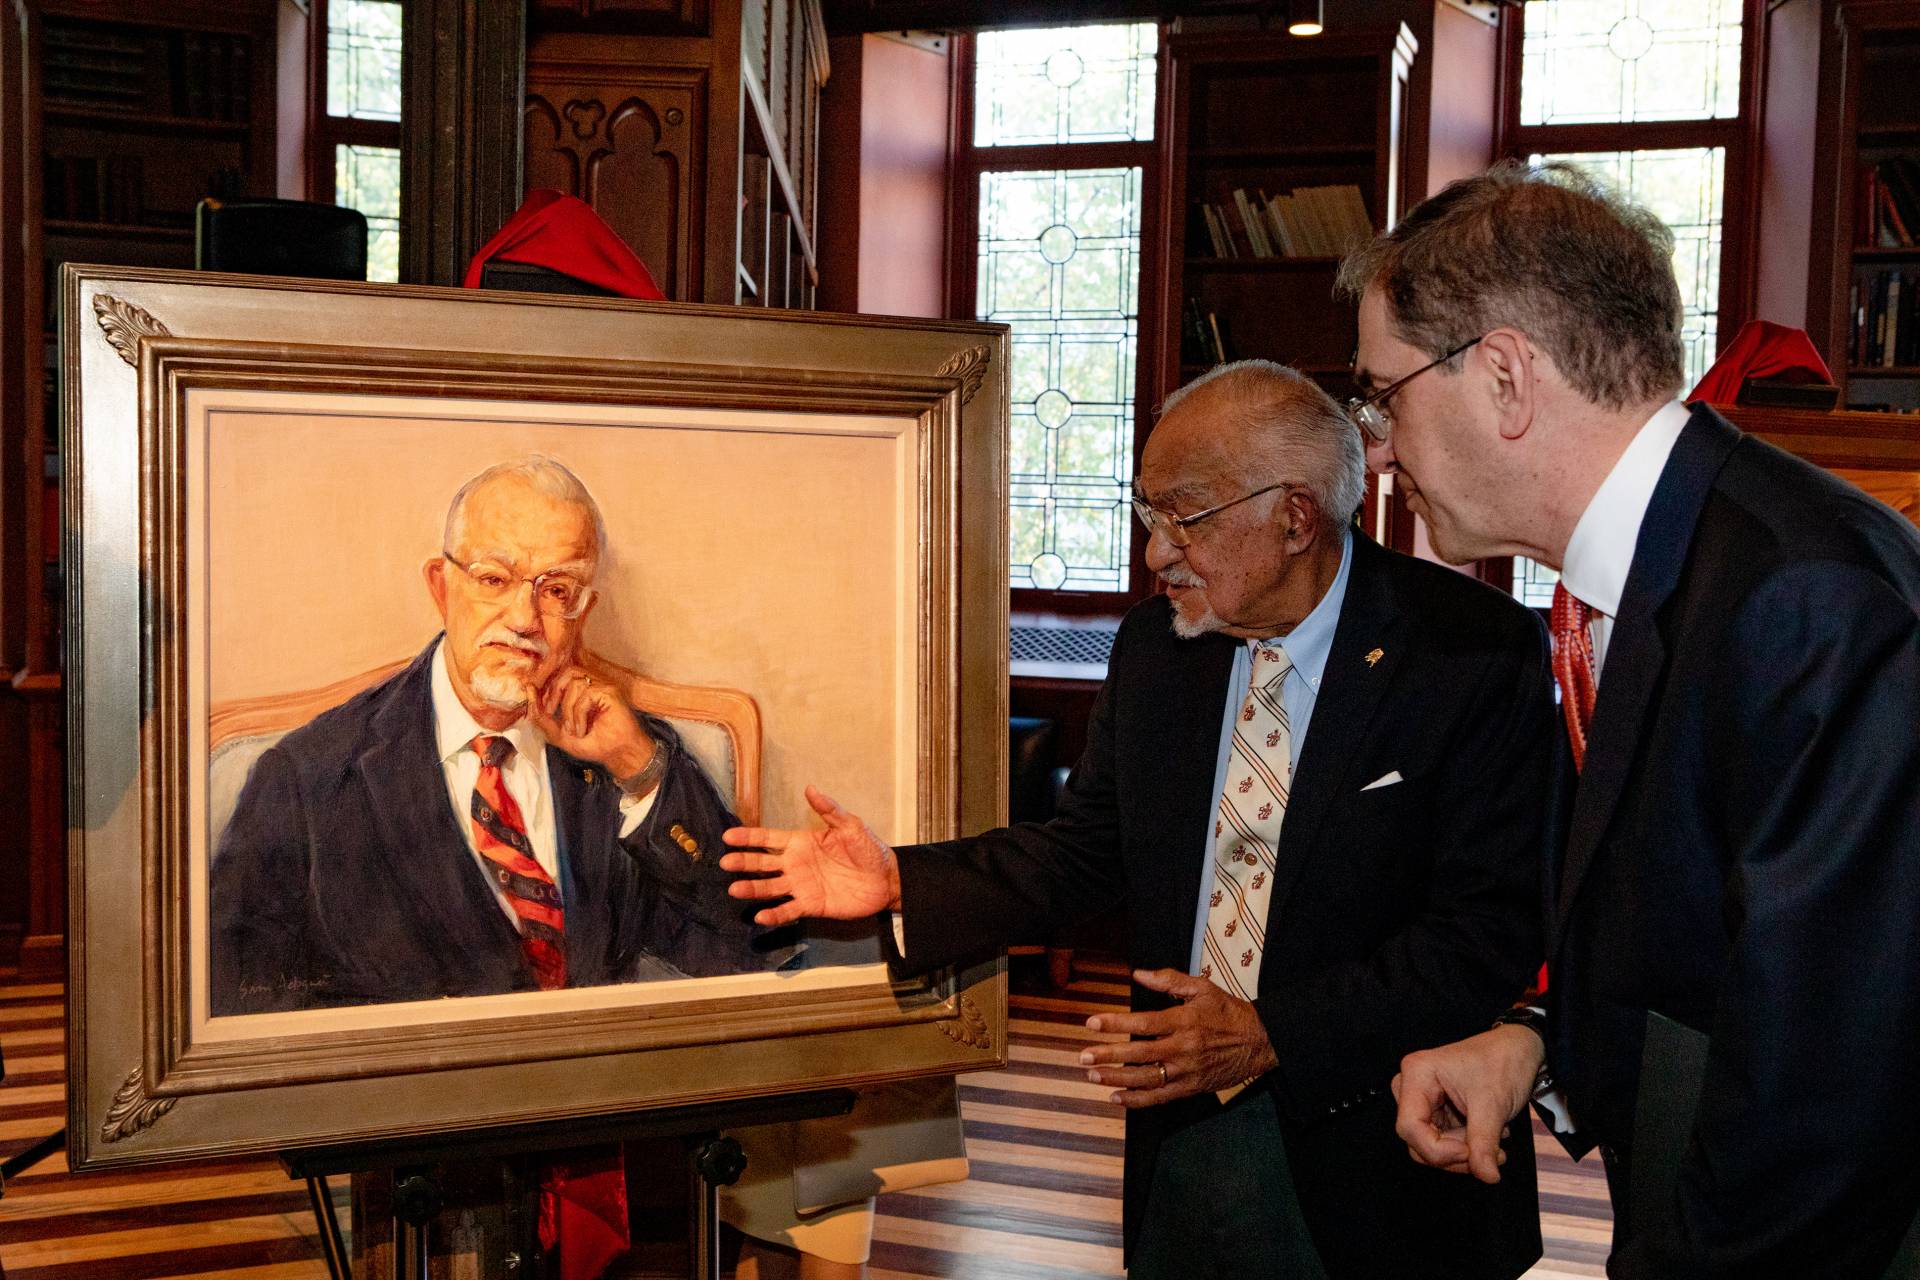 Rivers looks at his portrait with the president of the university